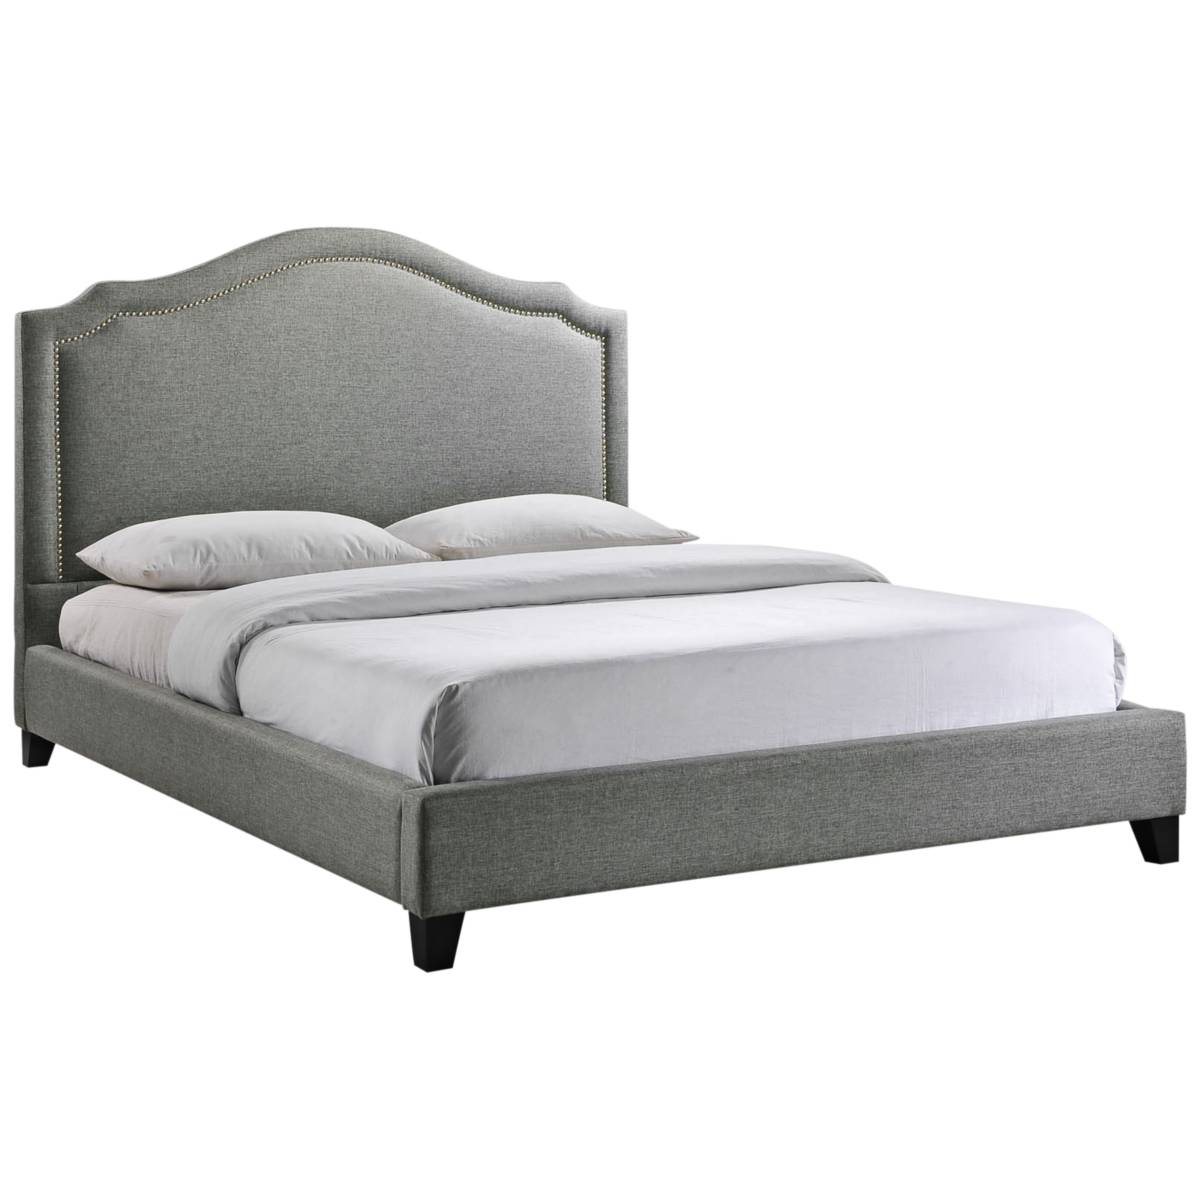 Bed Frames with Headboards & More - Complete Beds Online | Lamps Plus